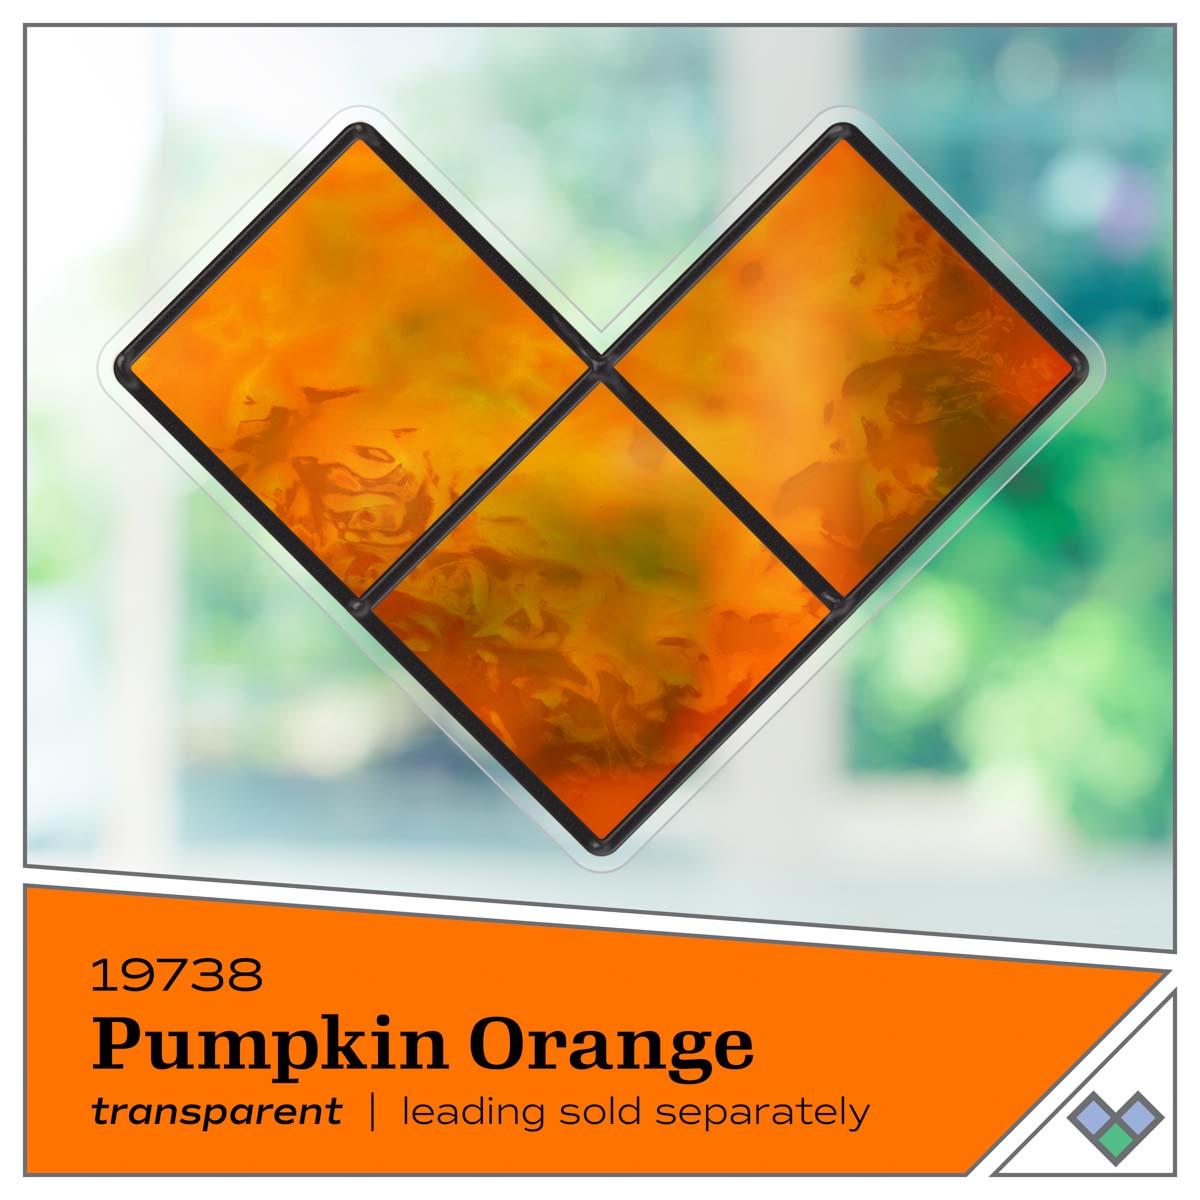 Gallery Glass ® Stained Glass Effect Paint - Pumpkin Orange, 2 oz. - 19738